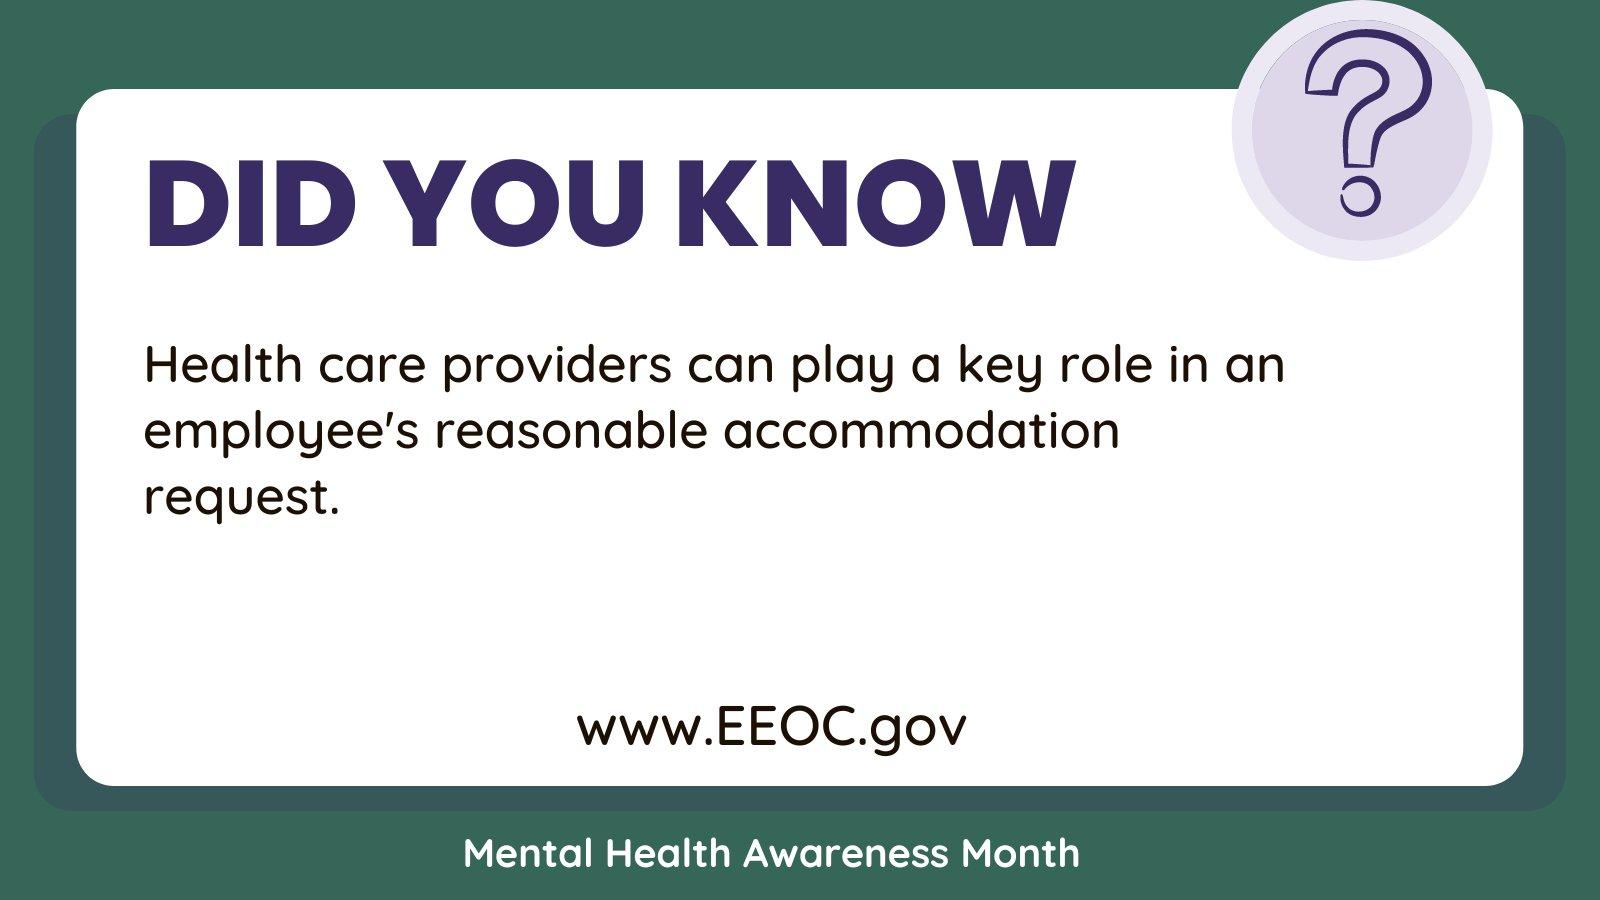 Mental Health Provider\'s Role in Requests for a Reasonable Accommodation at Work